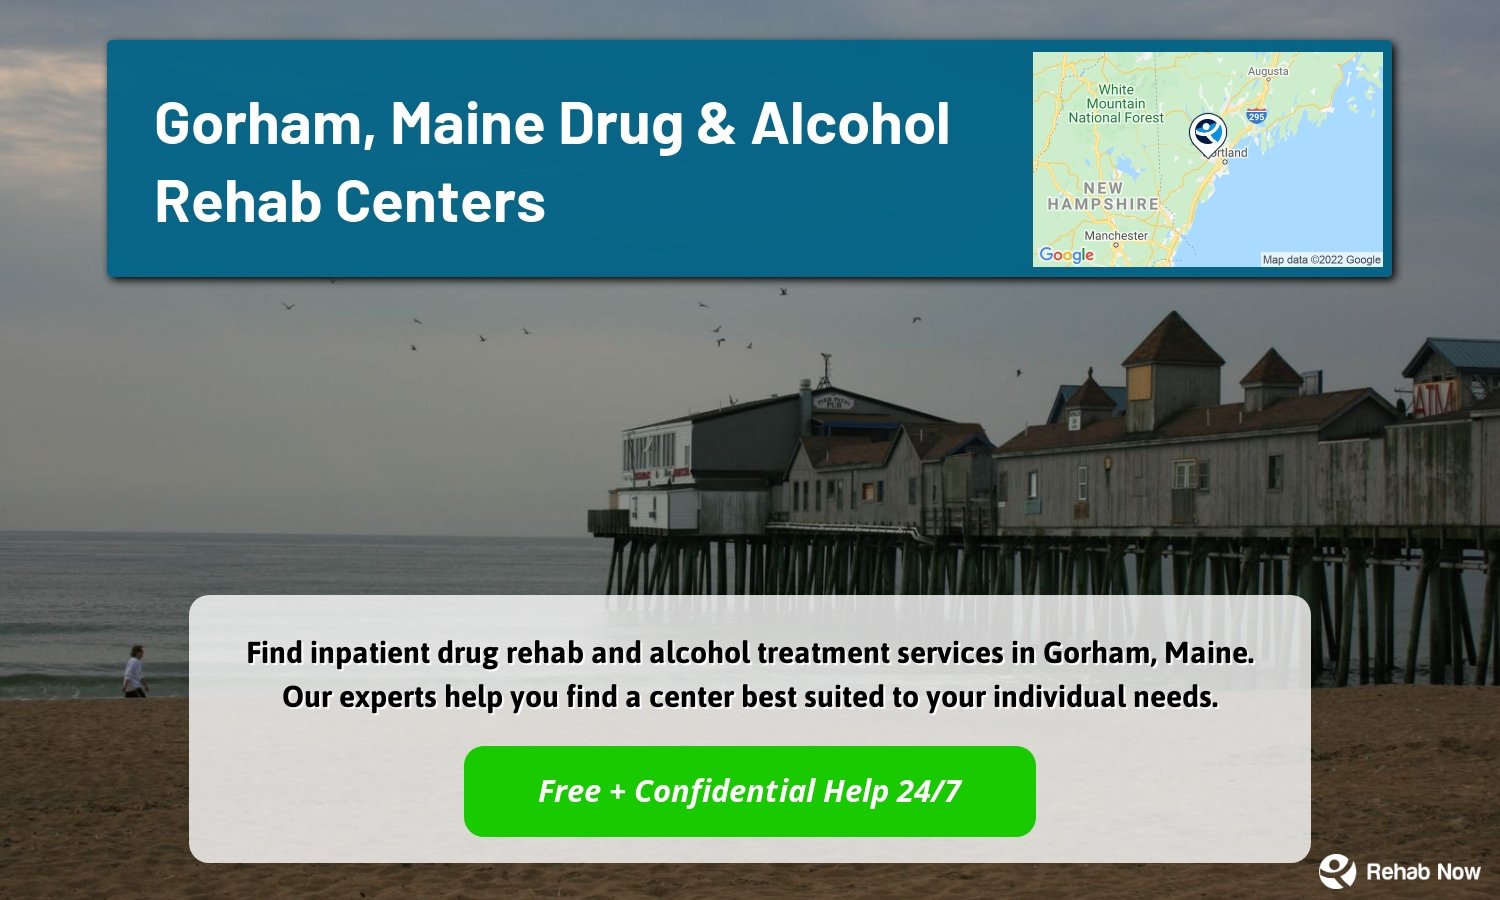 Find inpatient drug rehab and alcohol treatment services in Gorham, Maine. Our experts help you find a center best suited to your individual needs.